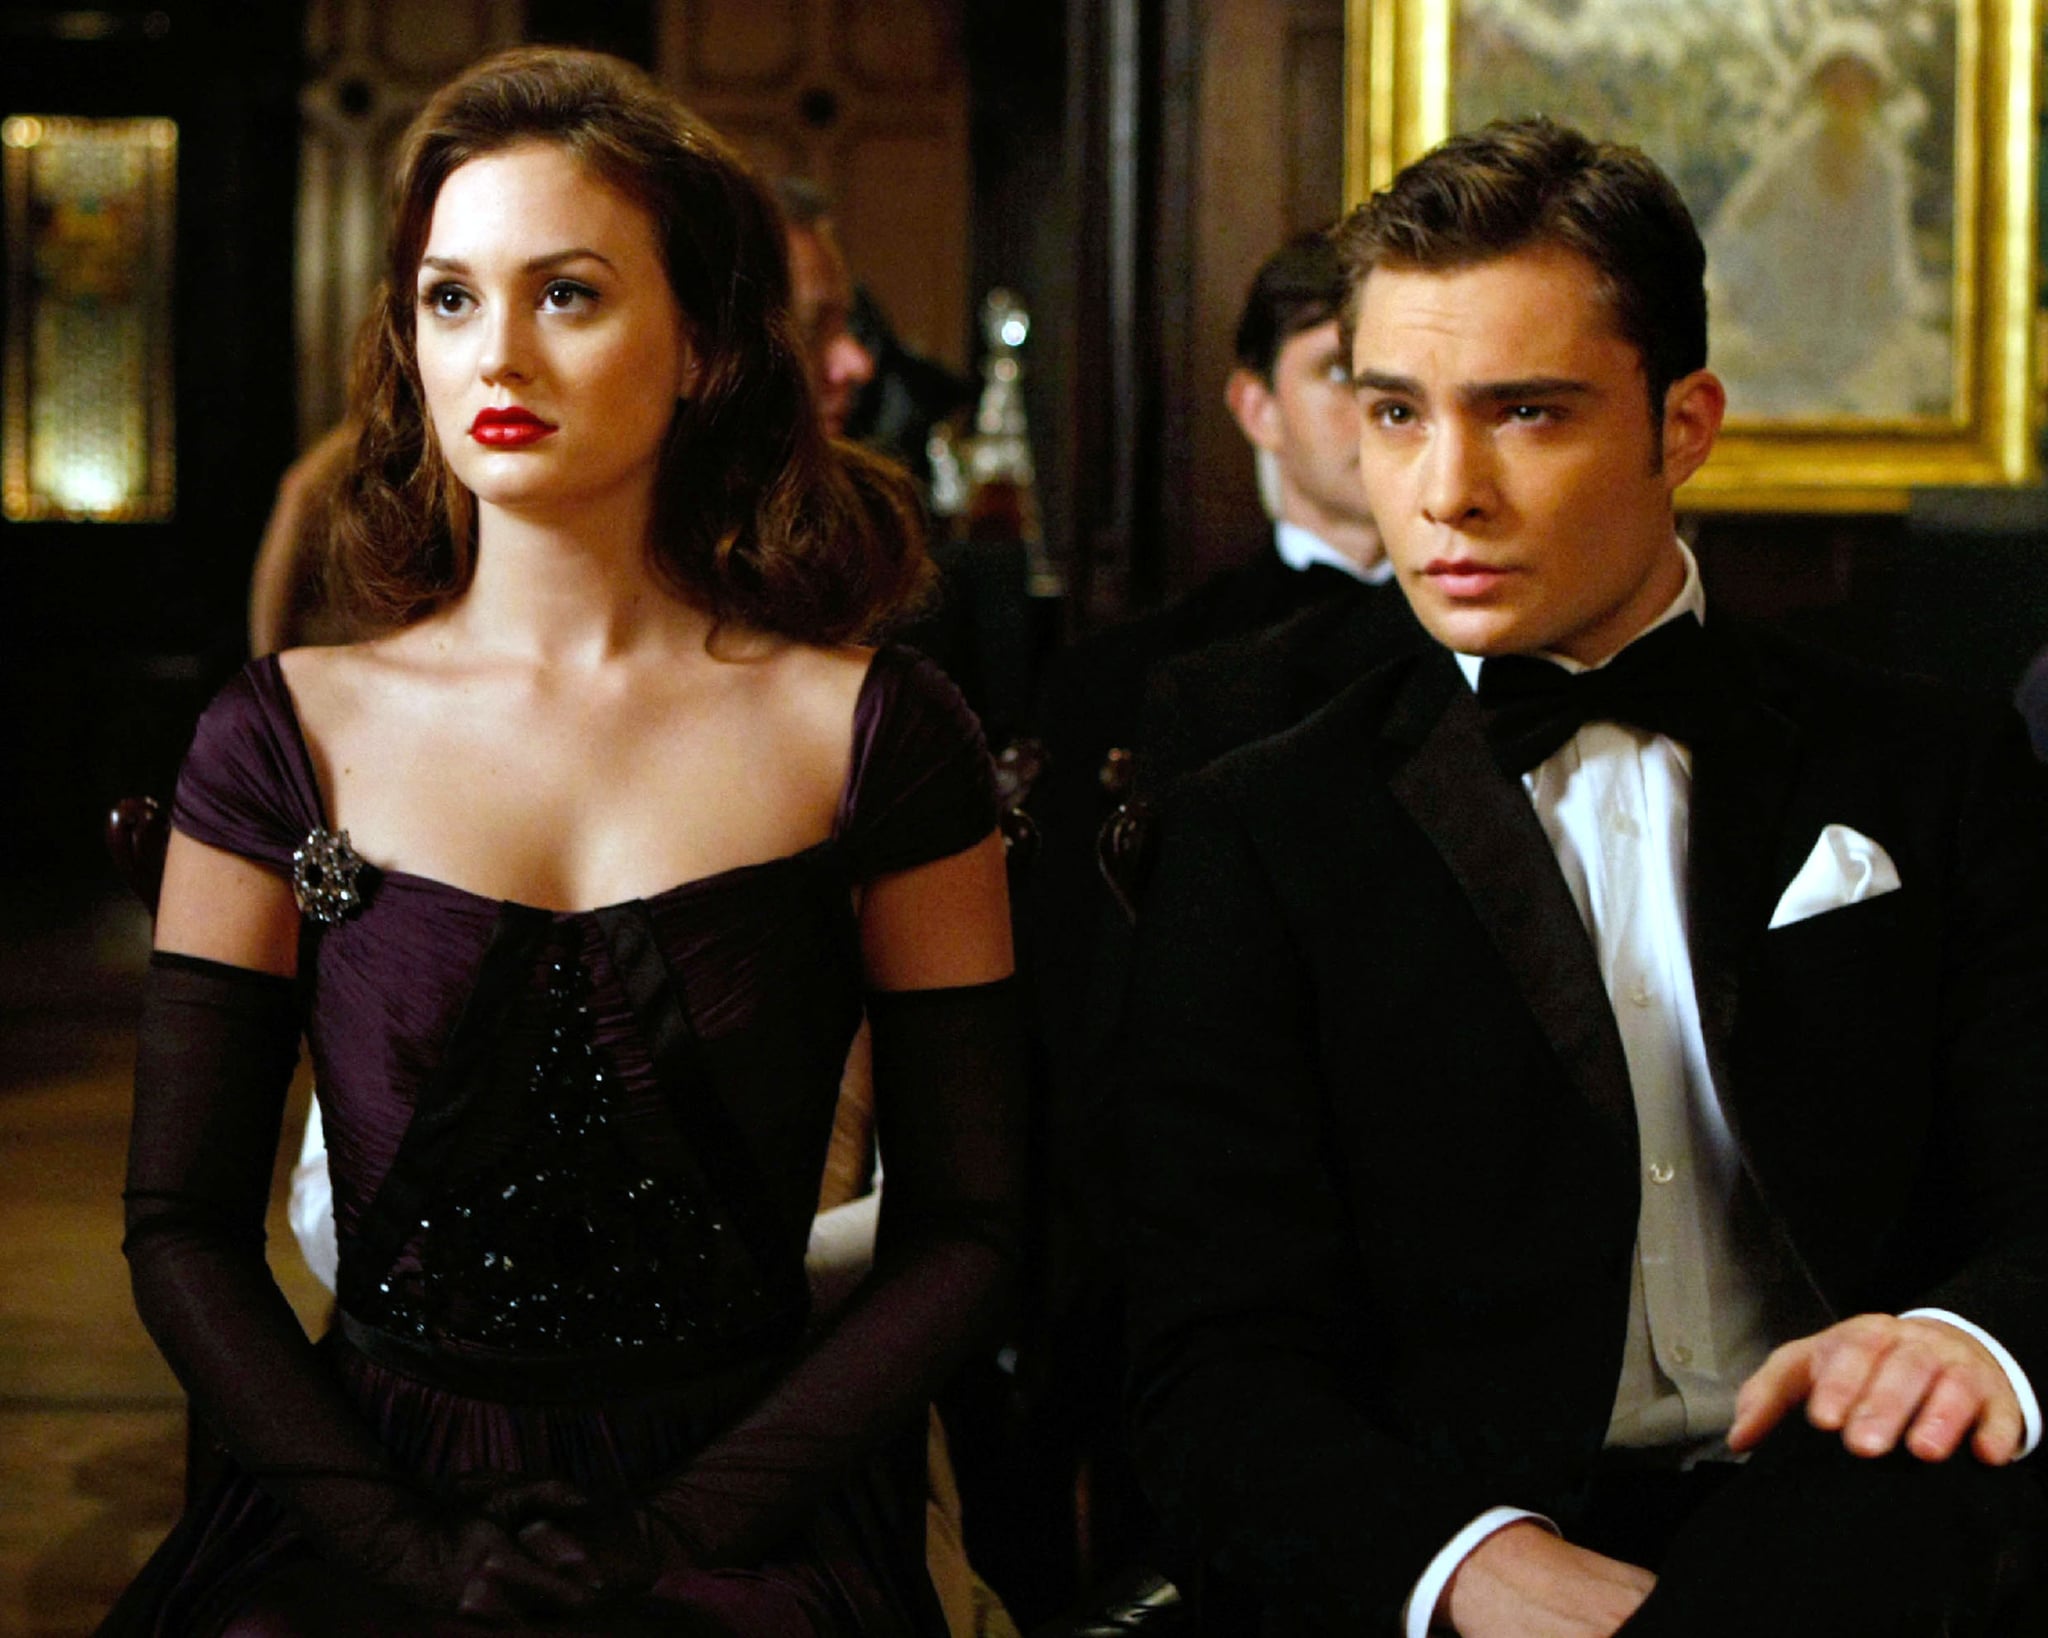 How to Copy Blair Waldorf's Iconic Style From Gossip Girl